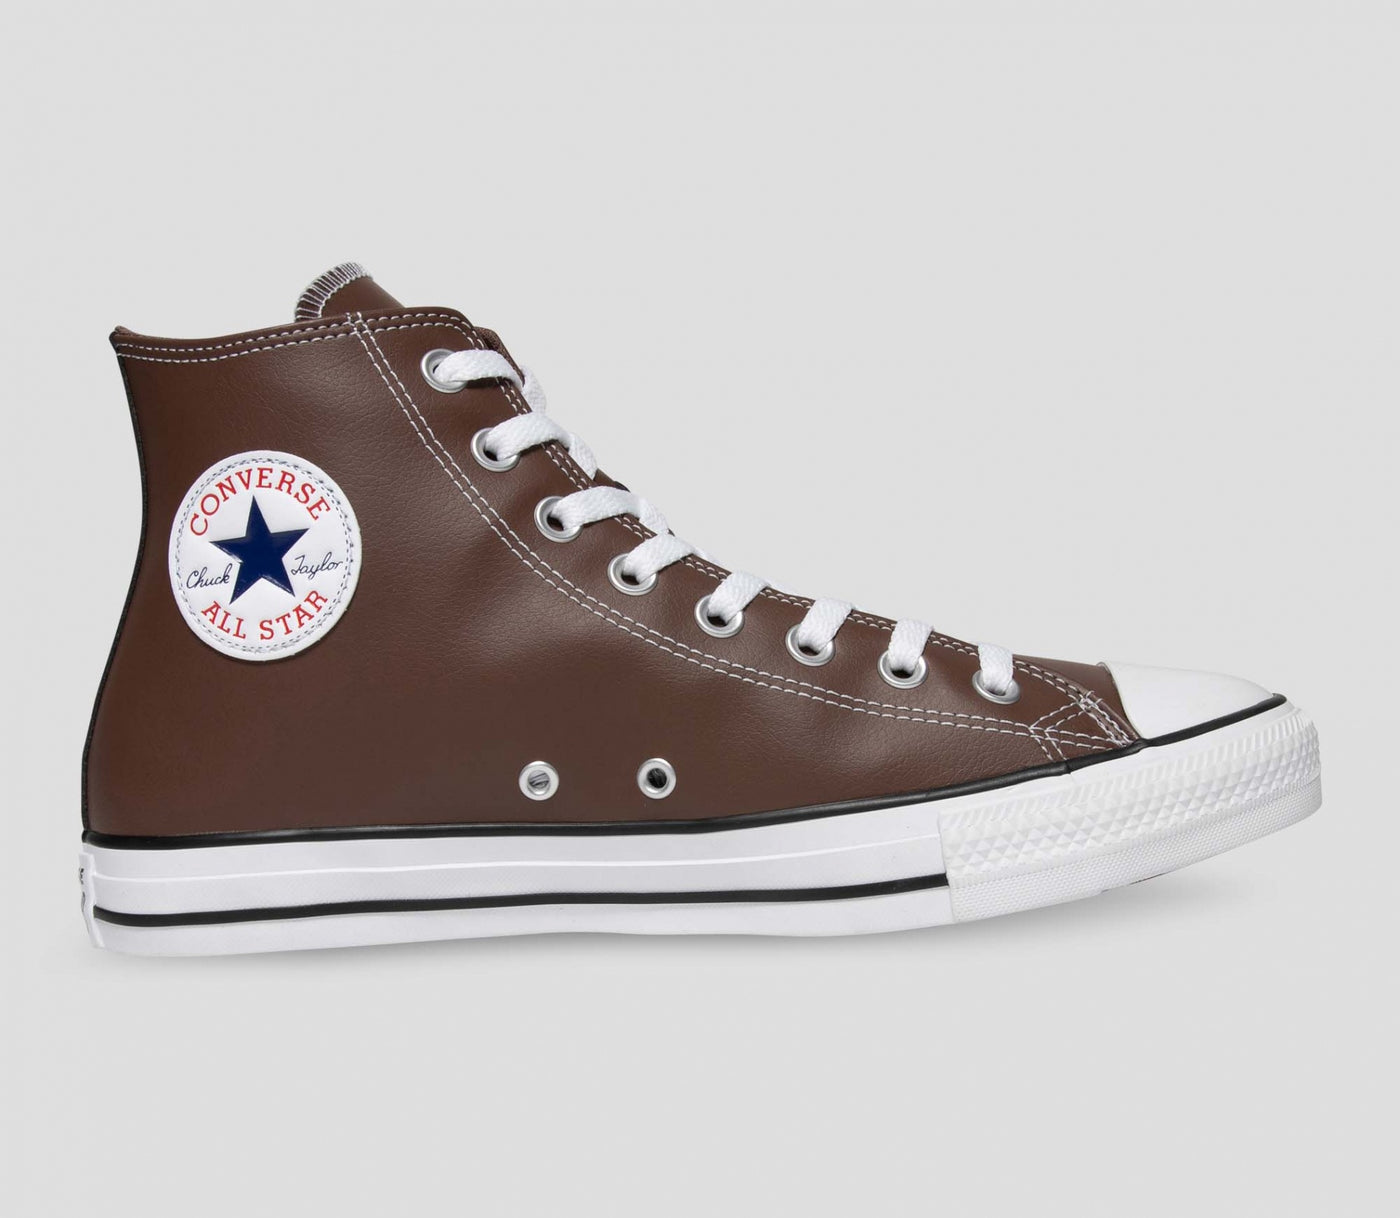 Converse Chuck Taylor High Top Faux Leather Brazil Nut